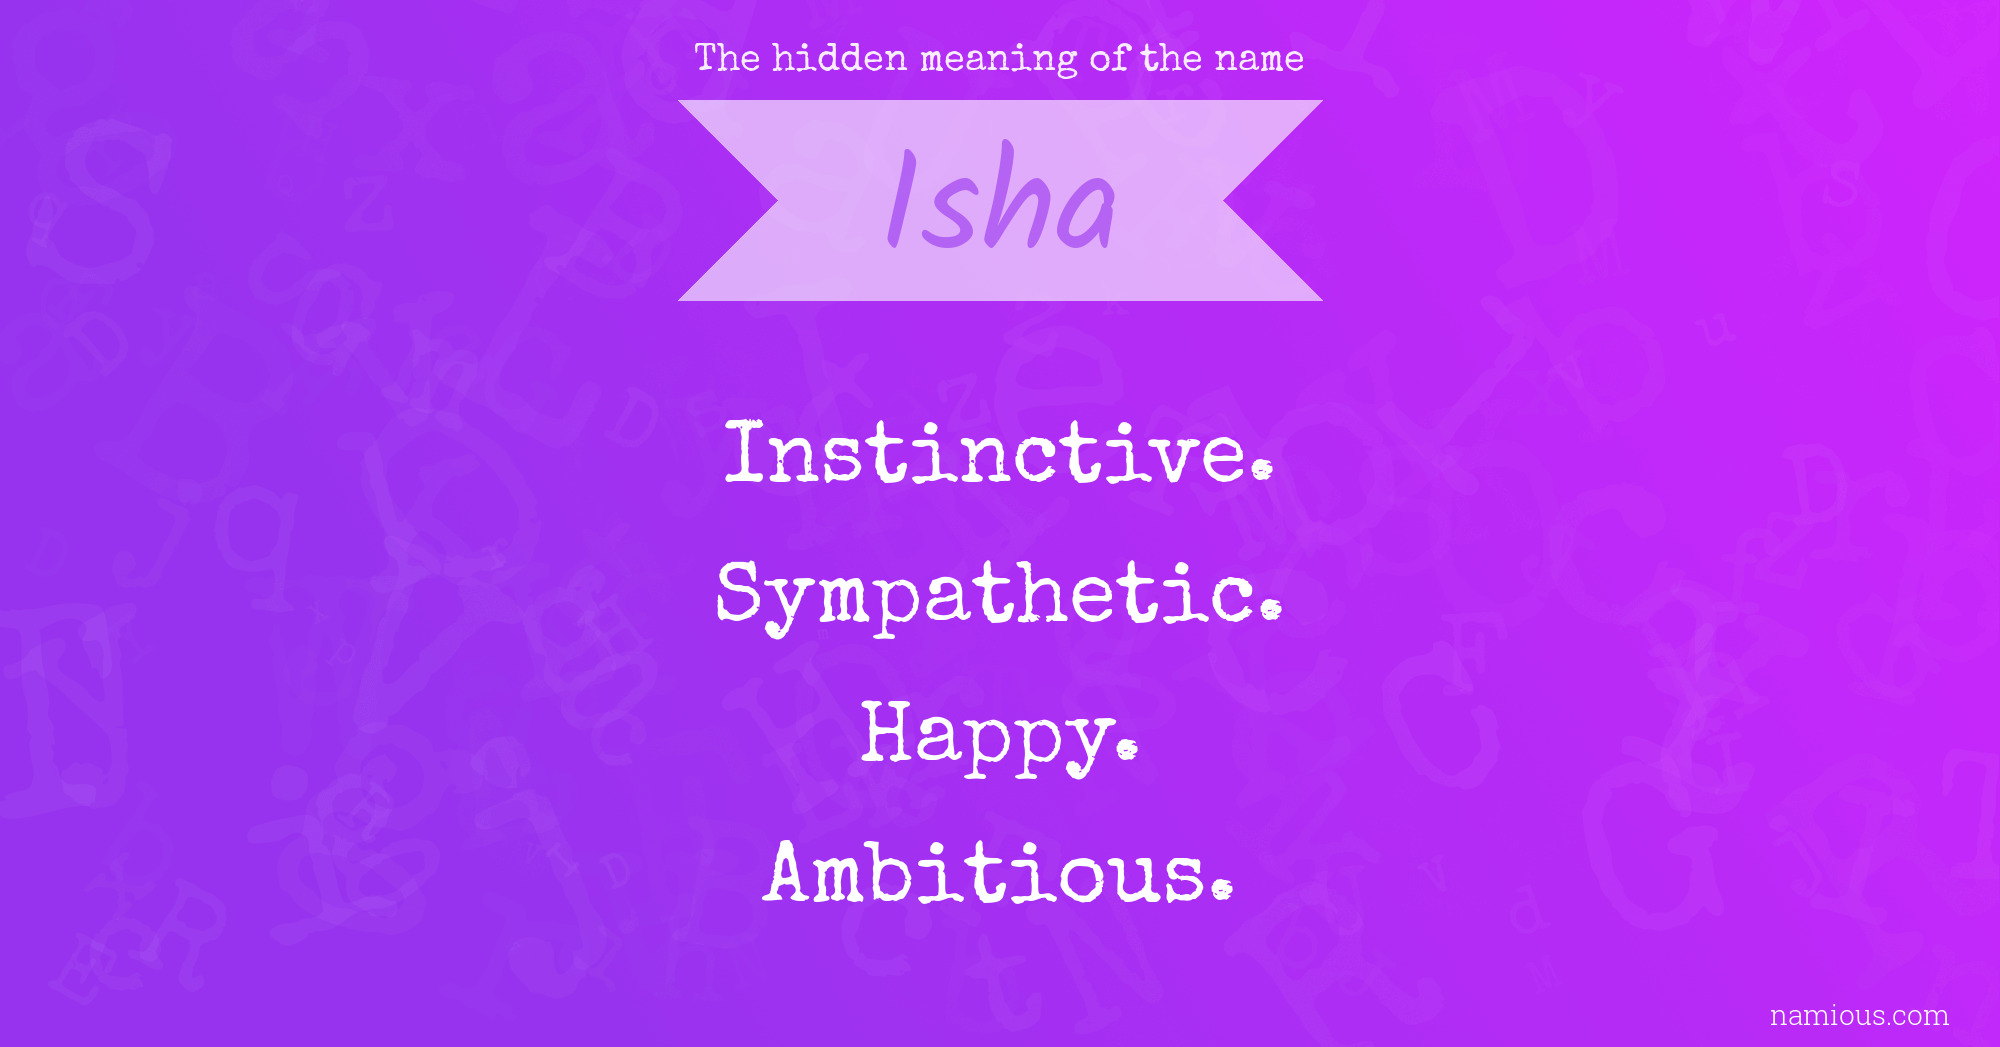 The hidden meaning of the name Isha